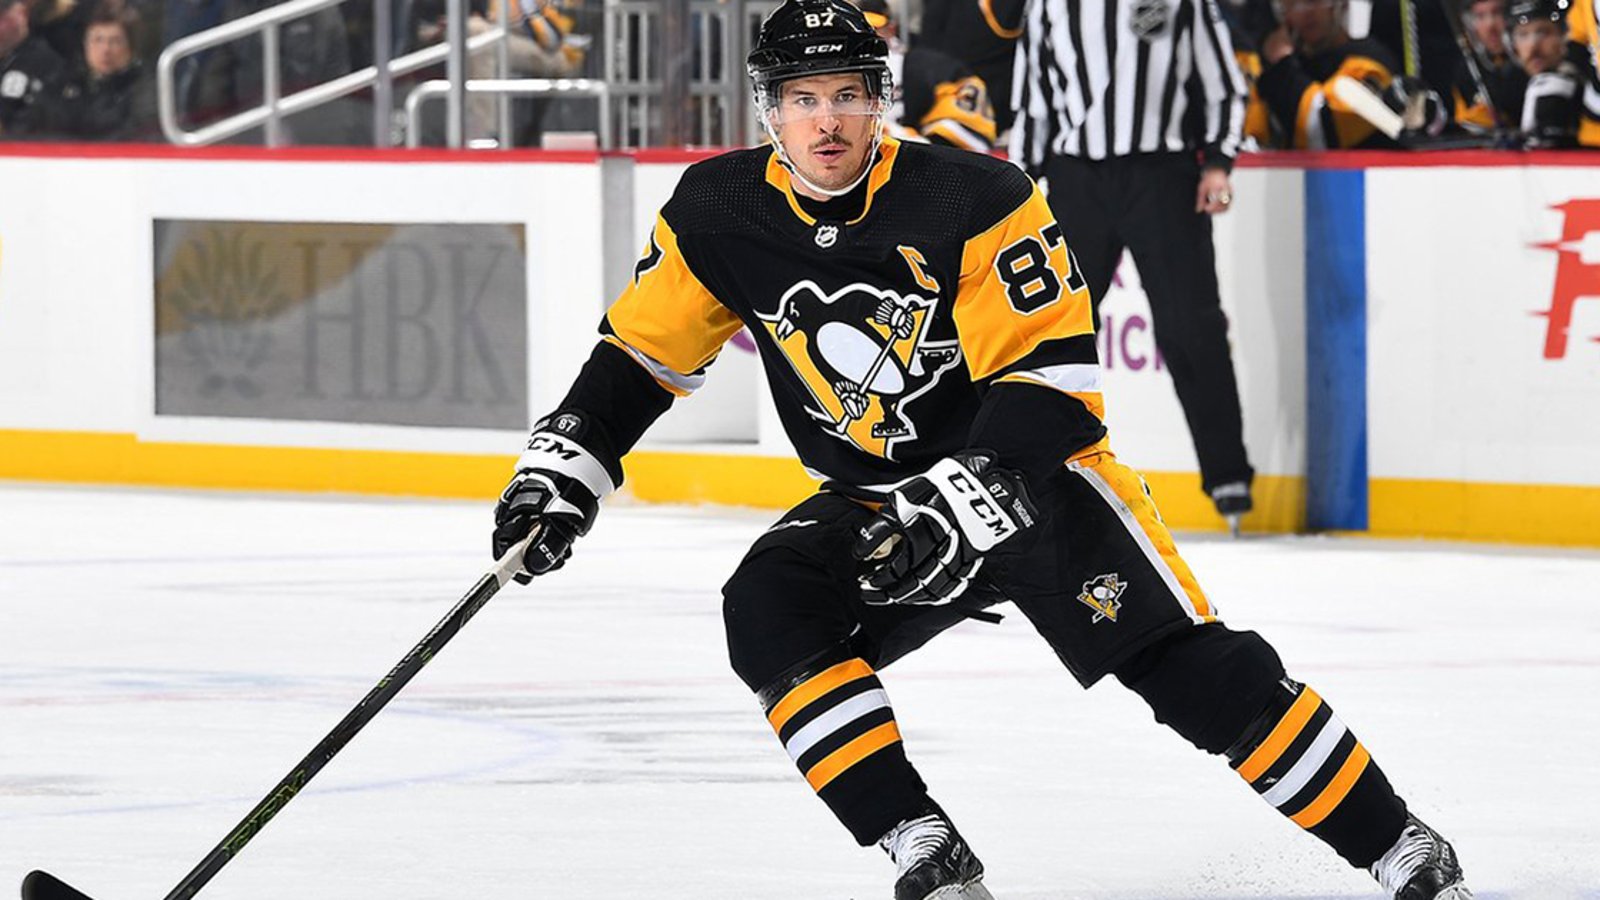 Gameday Report: Crosby returns to Pens lineup